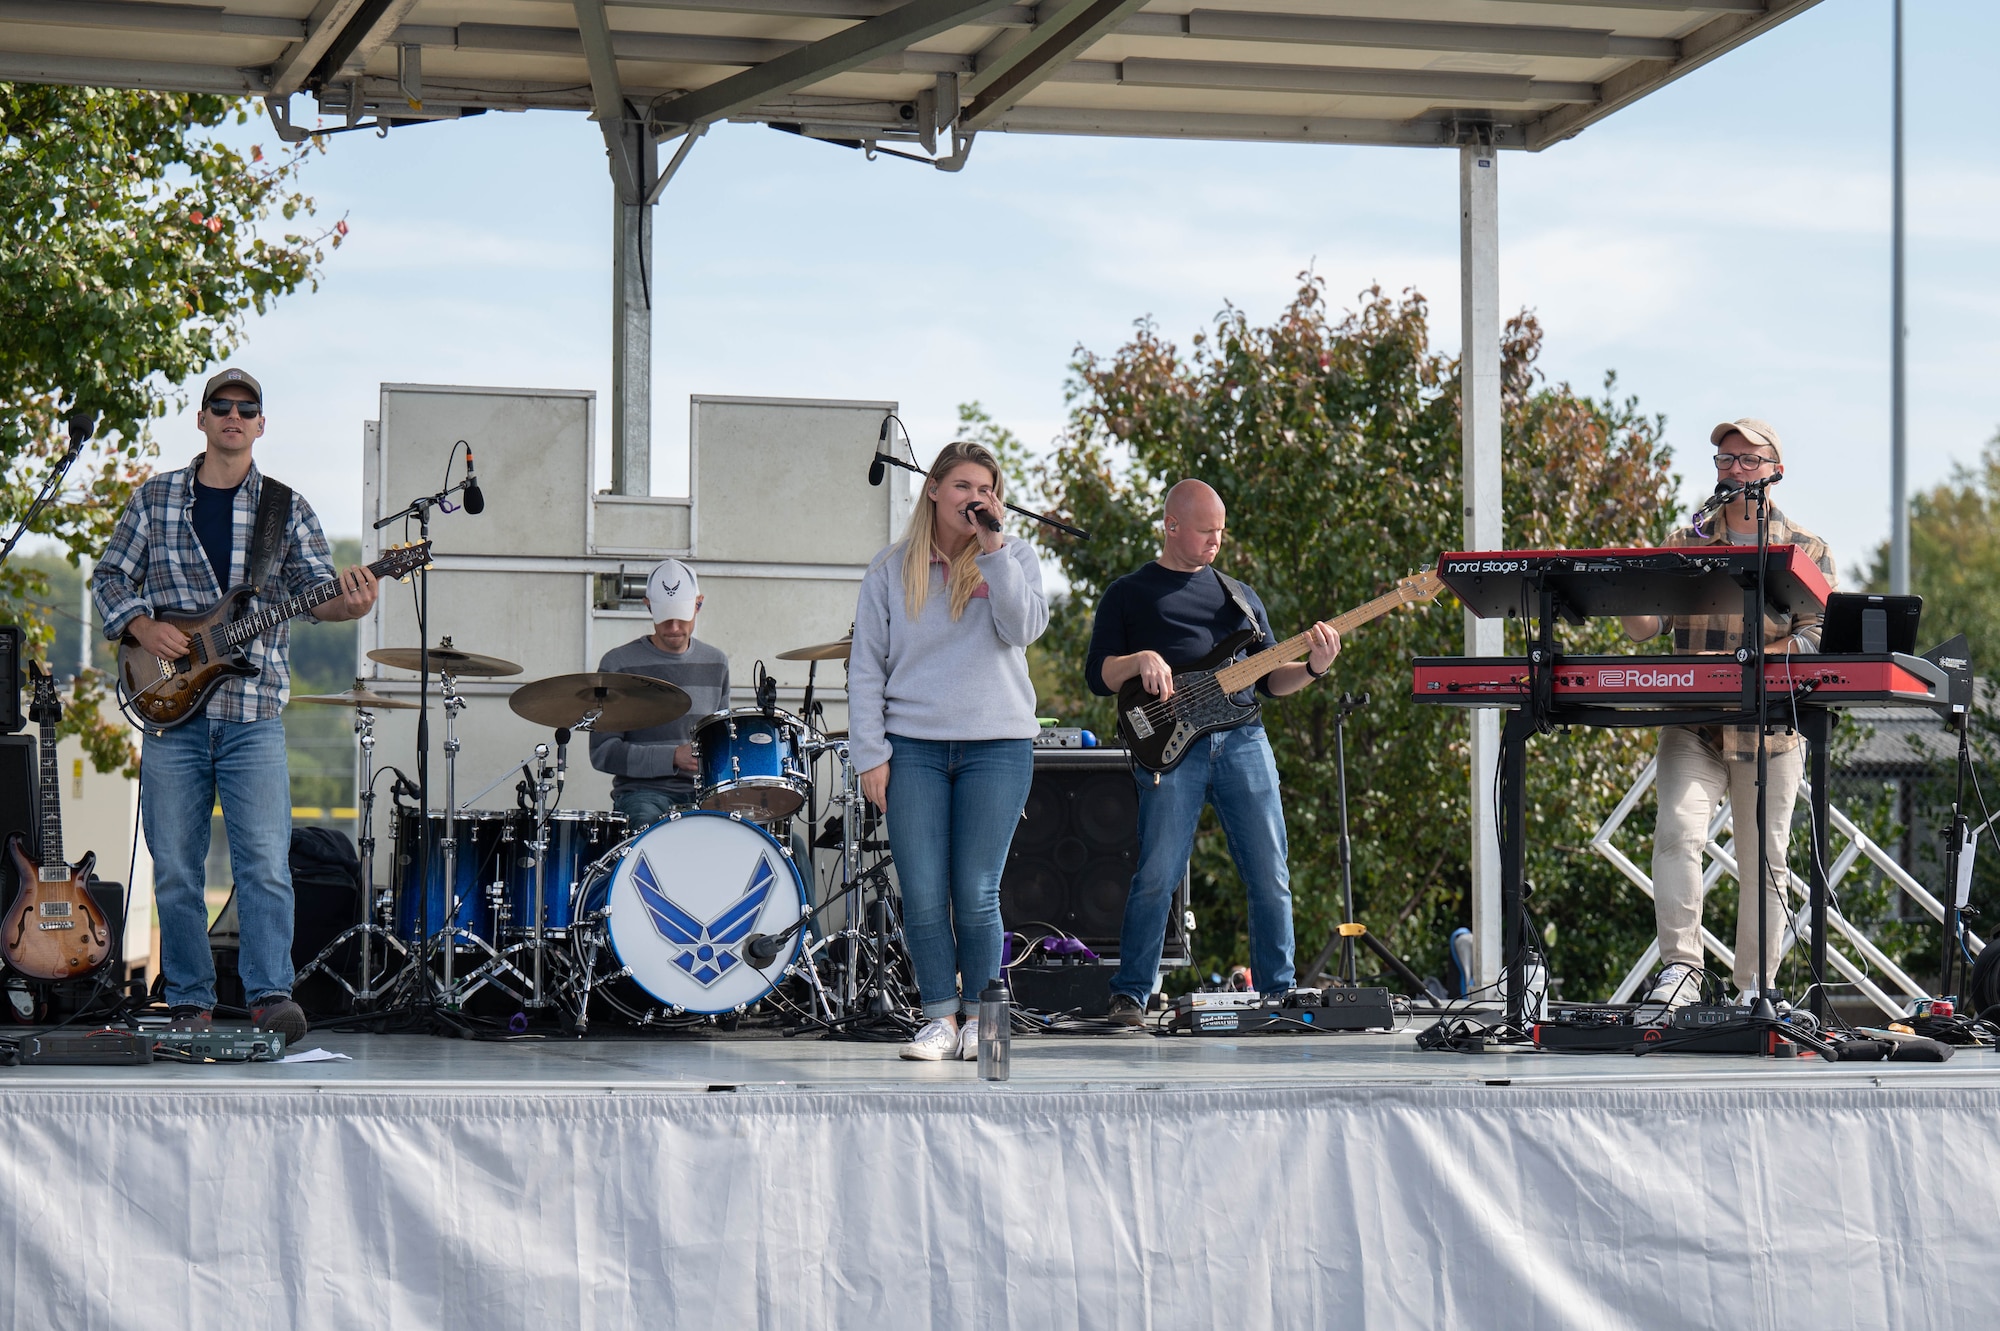 The United States Air Force Band's Max Impact performs at the Sentinels Celebration, Joint Base Anacostia-Bolling, Washington, D.C., Oct. 12, 2022. The Sentinels Celebration was held in honor of the base reaching Full Operational Capability after the first-ever Department of Defense lead service transfer in 2020. (U.S. Air Force photo by Kristen Wong)